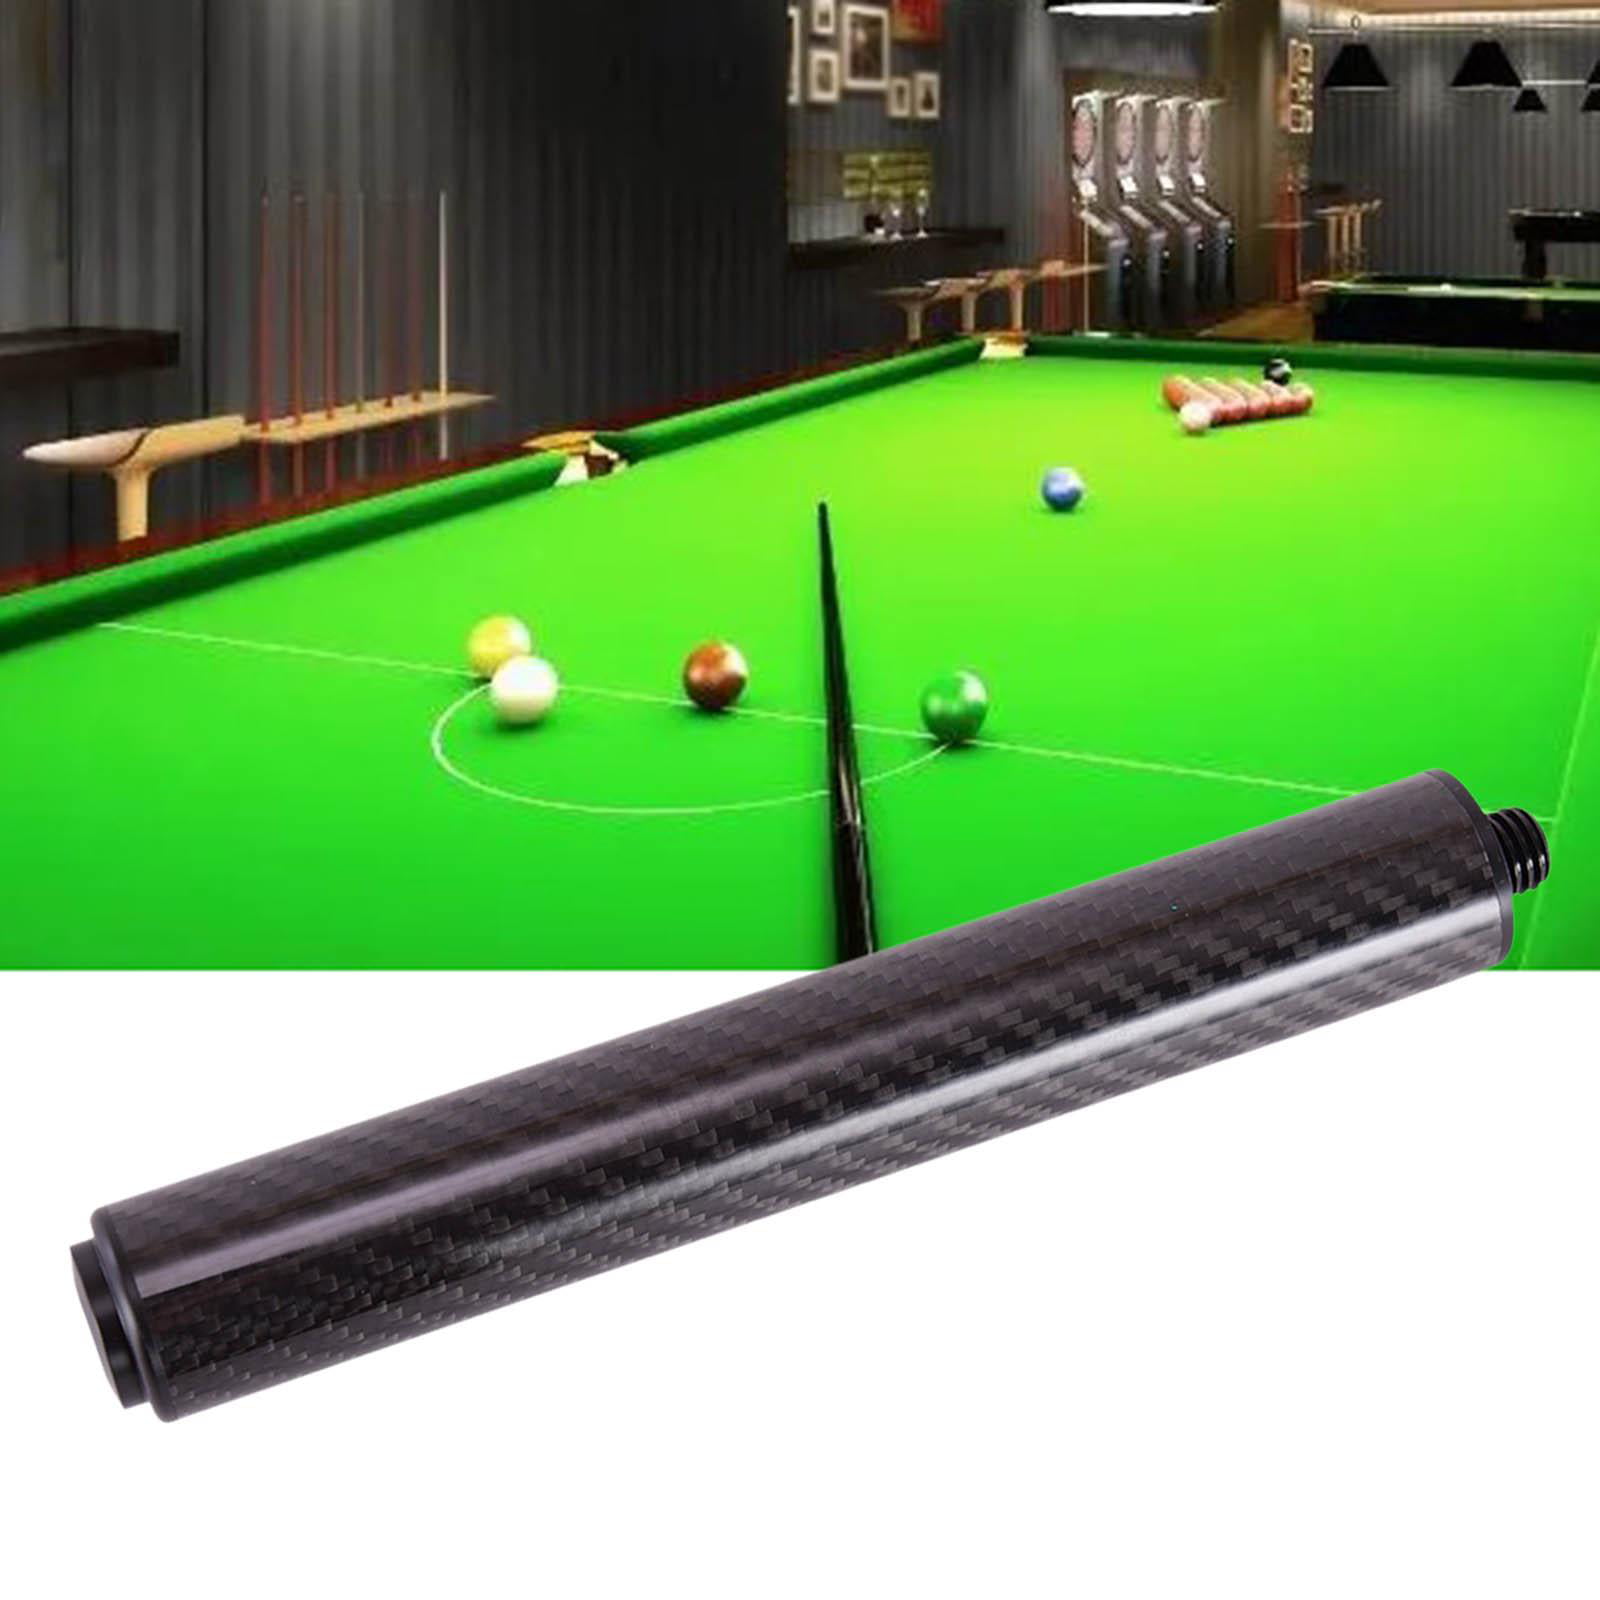 Billiard Pool Cue Extension Extender Ultra Light Telescopic Extension System for Billiards Playing 